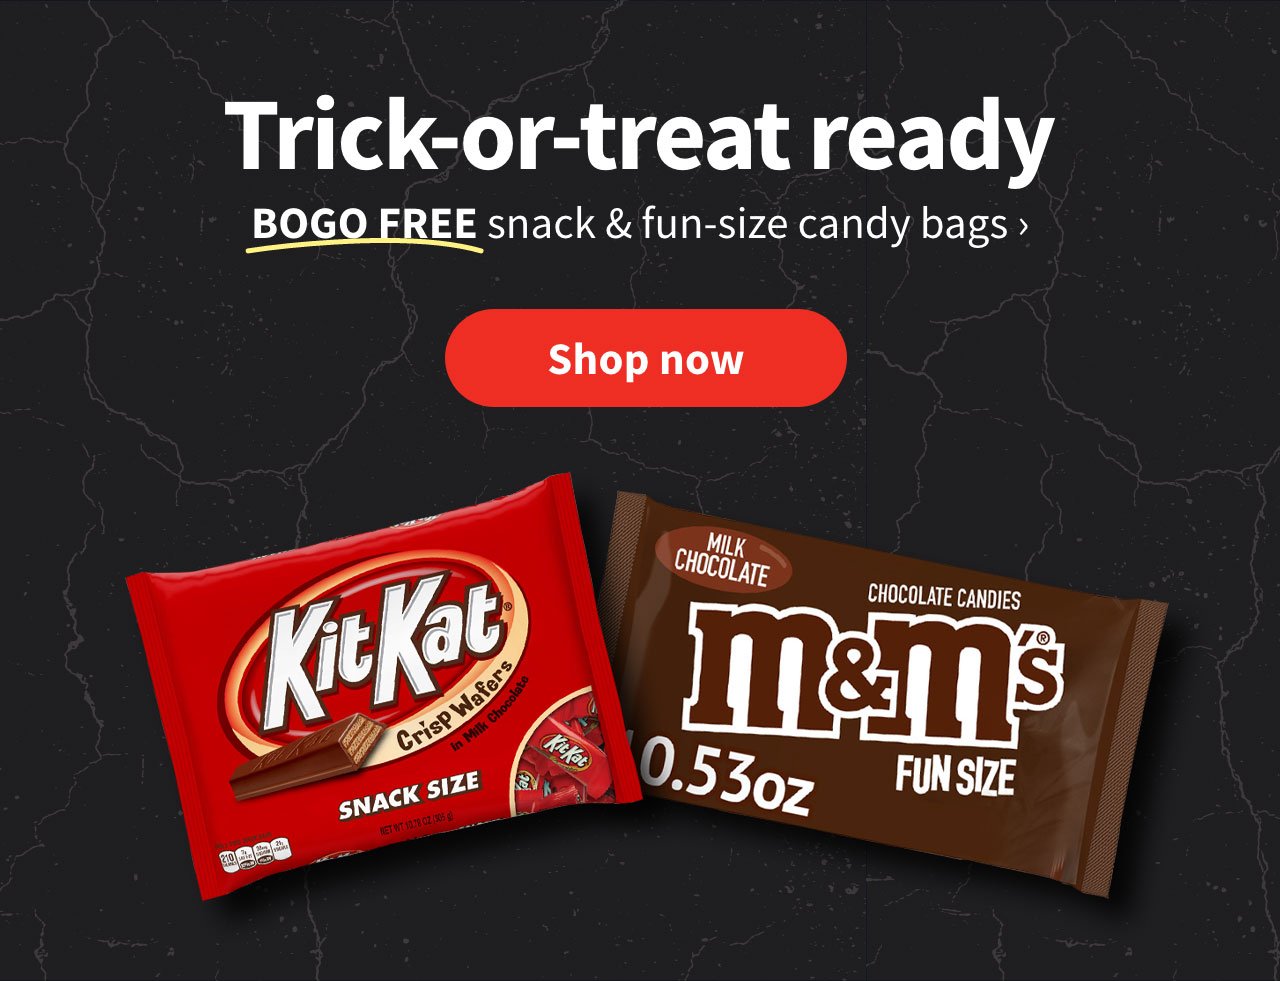 Trick-or-treat ready. BOGO FREE snack & fun-size candy bags. Shop now